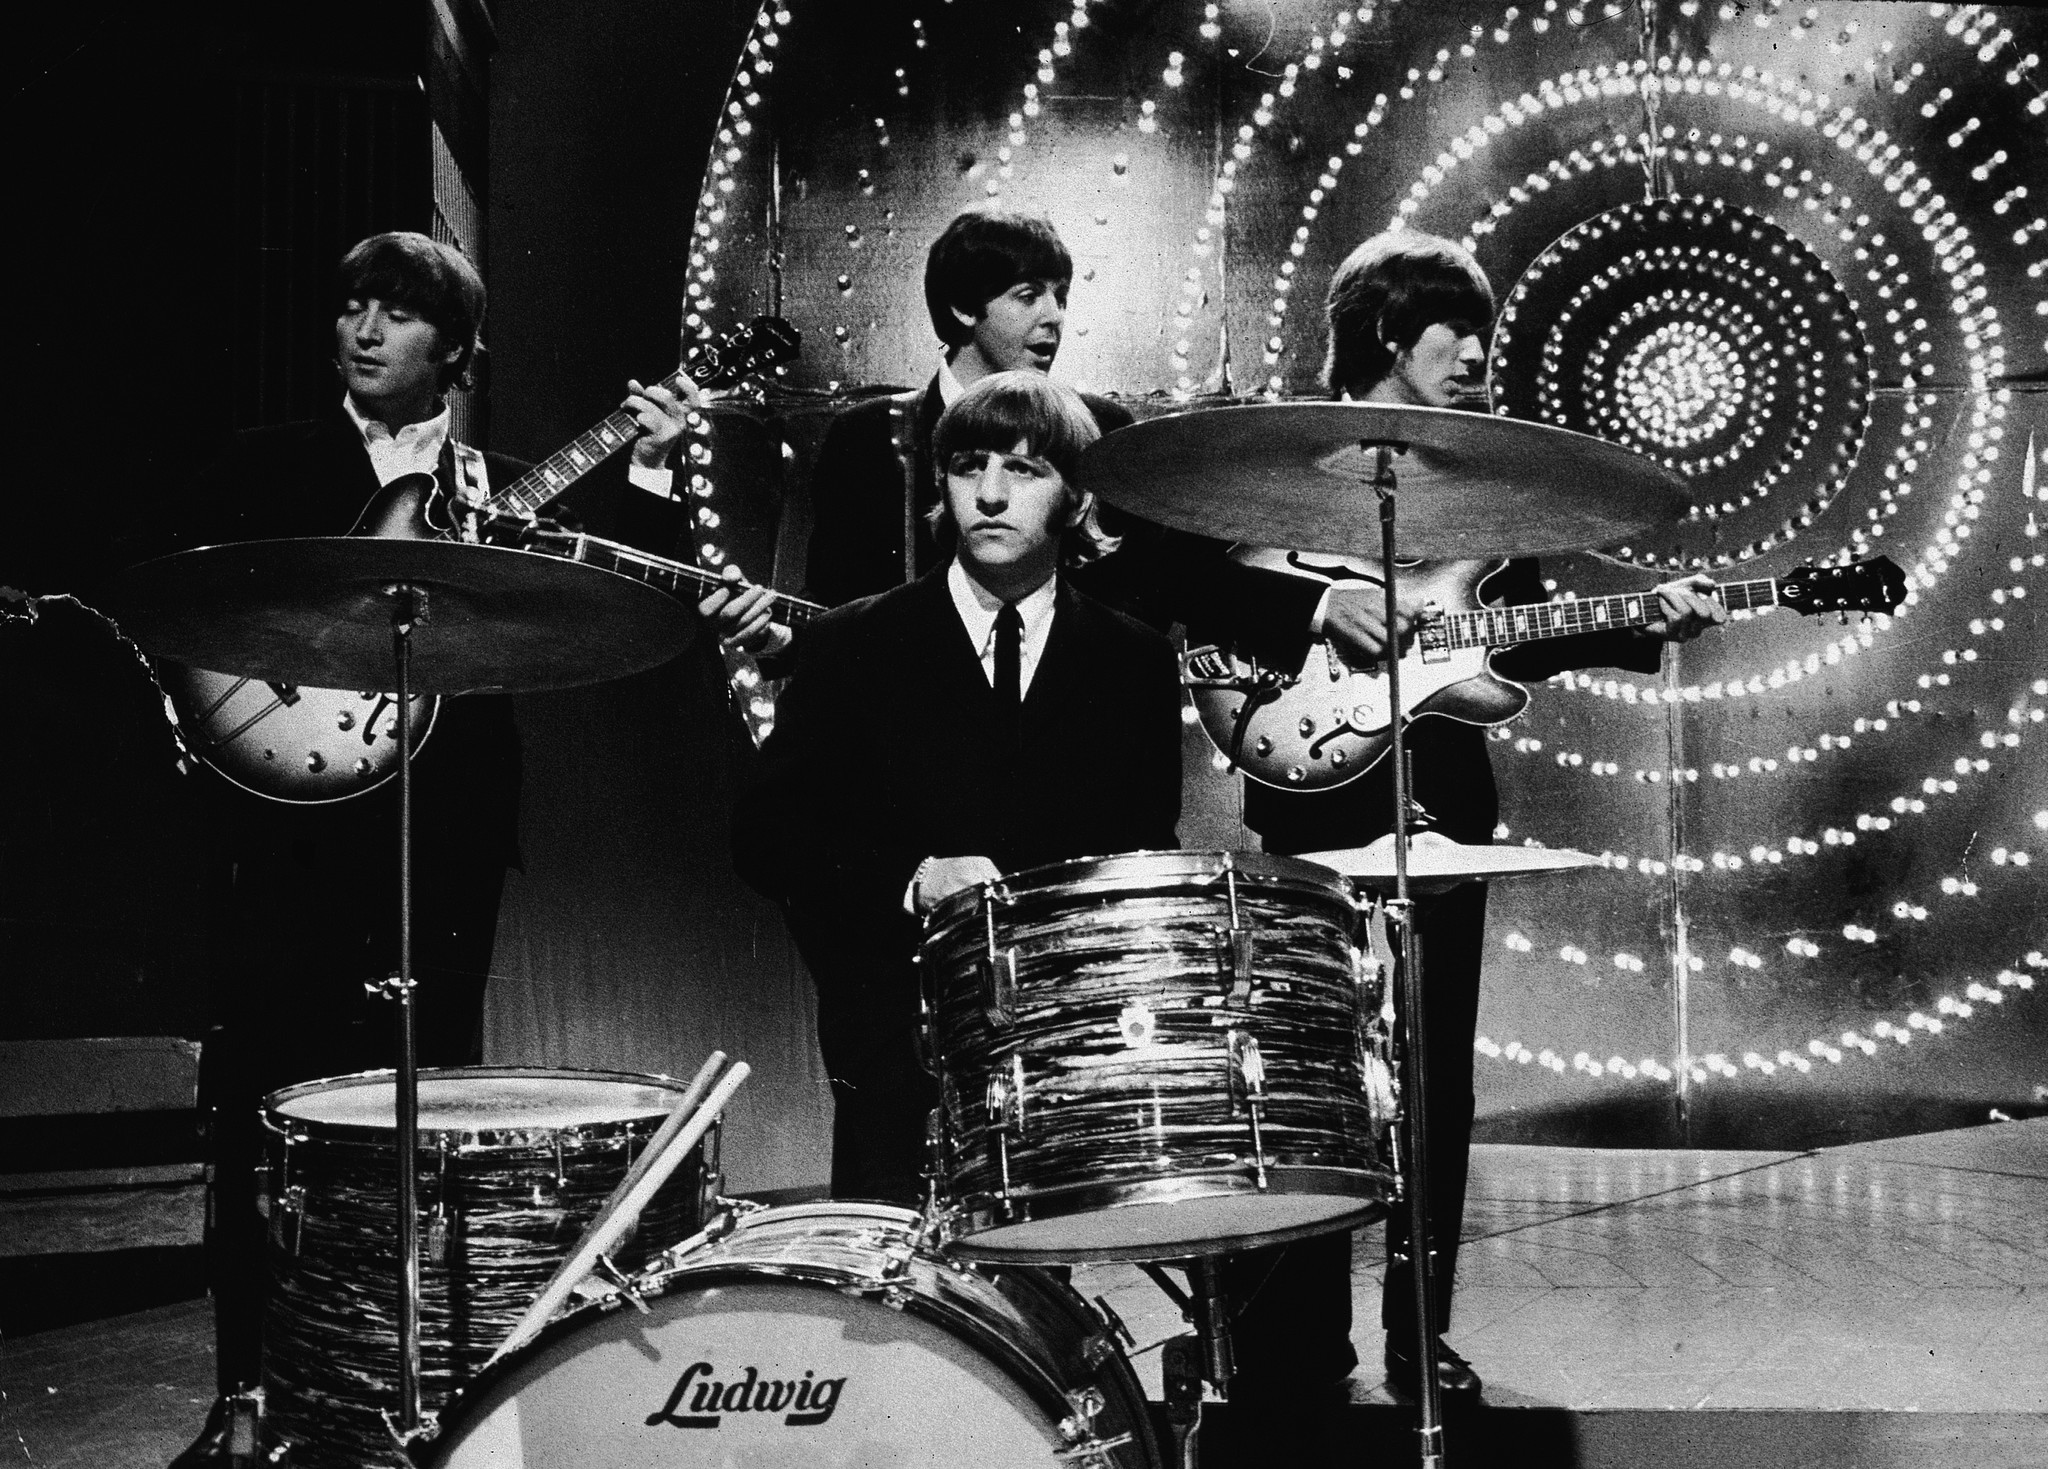 The Beatles perform live on stage at the BBC TV Centre on June 1, 1966.